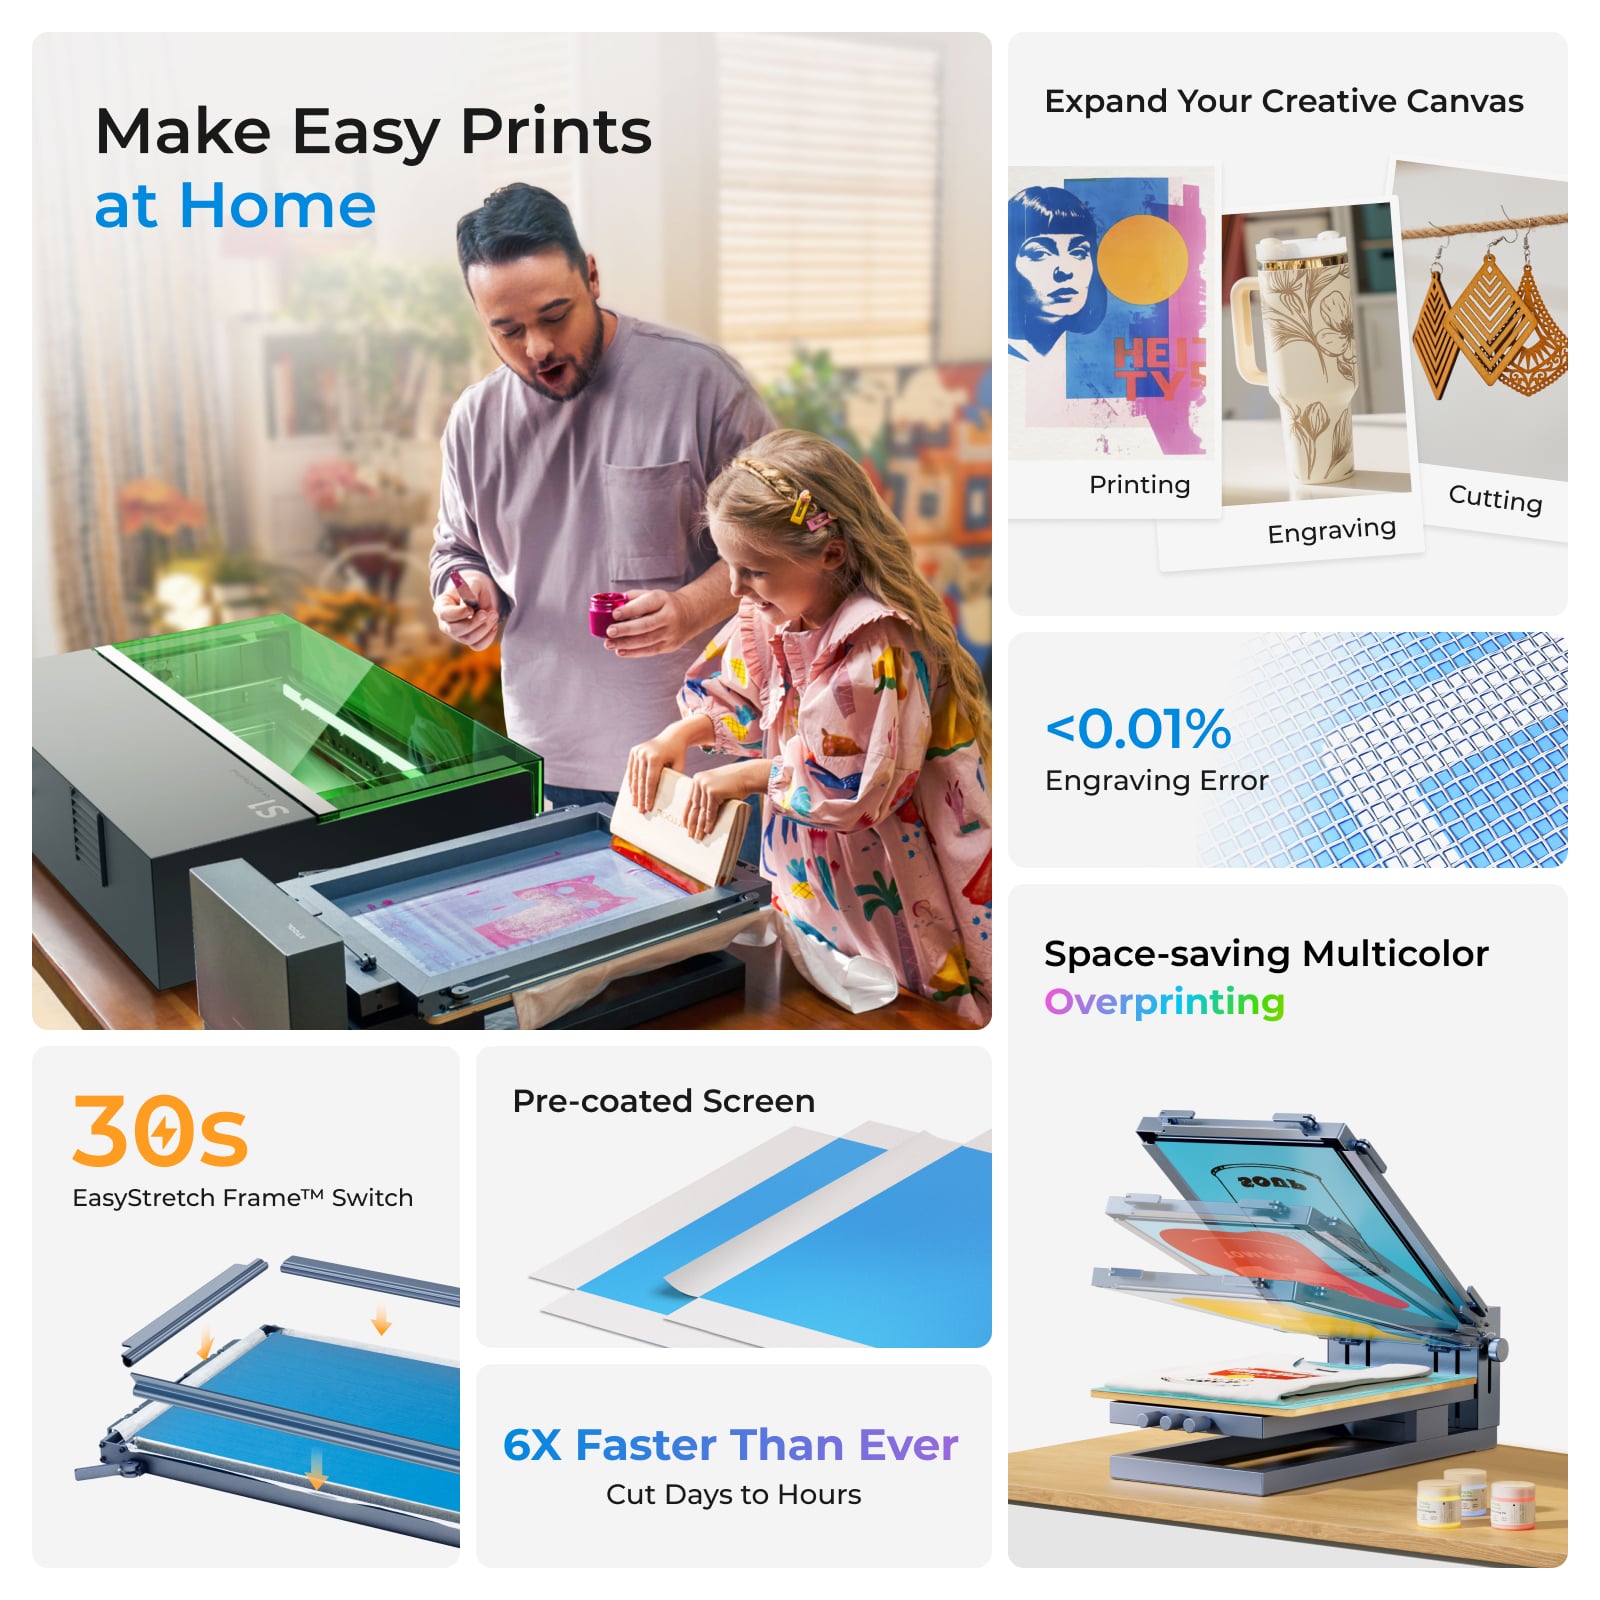 xTool Screen Printer: 1st Screen Printing Solution with Laser